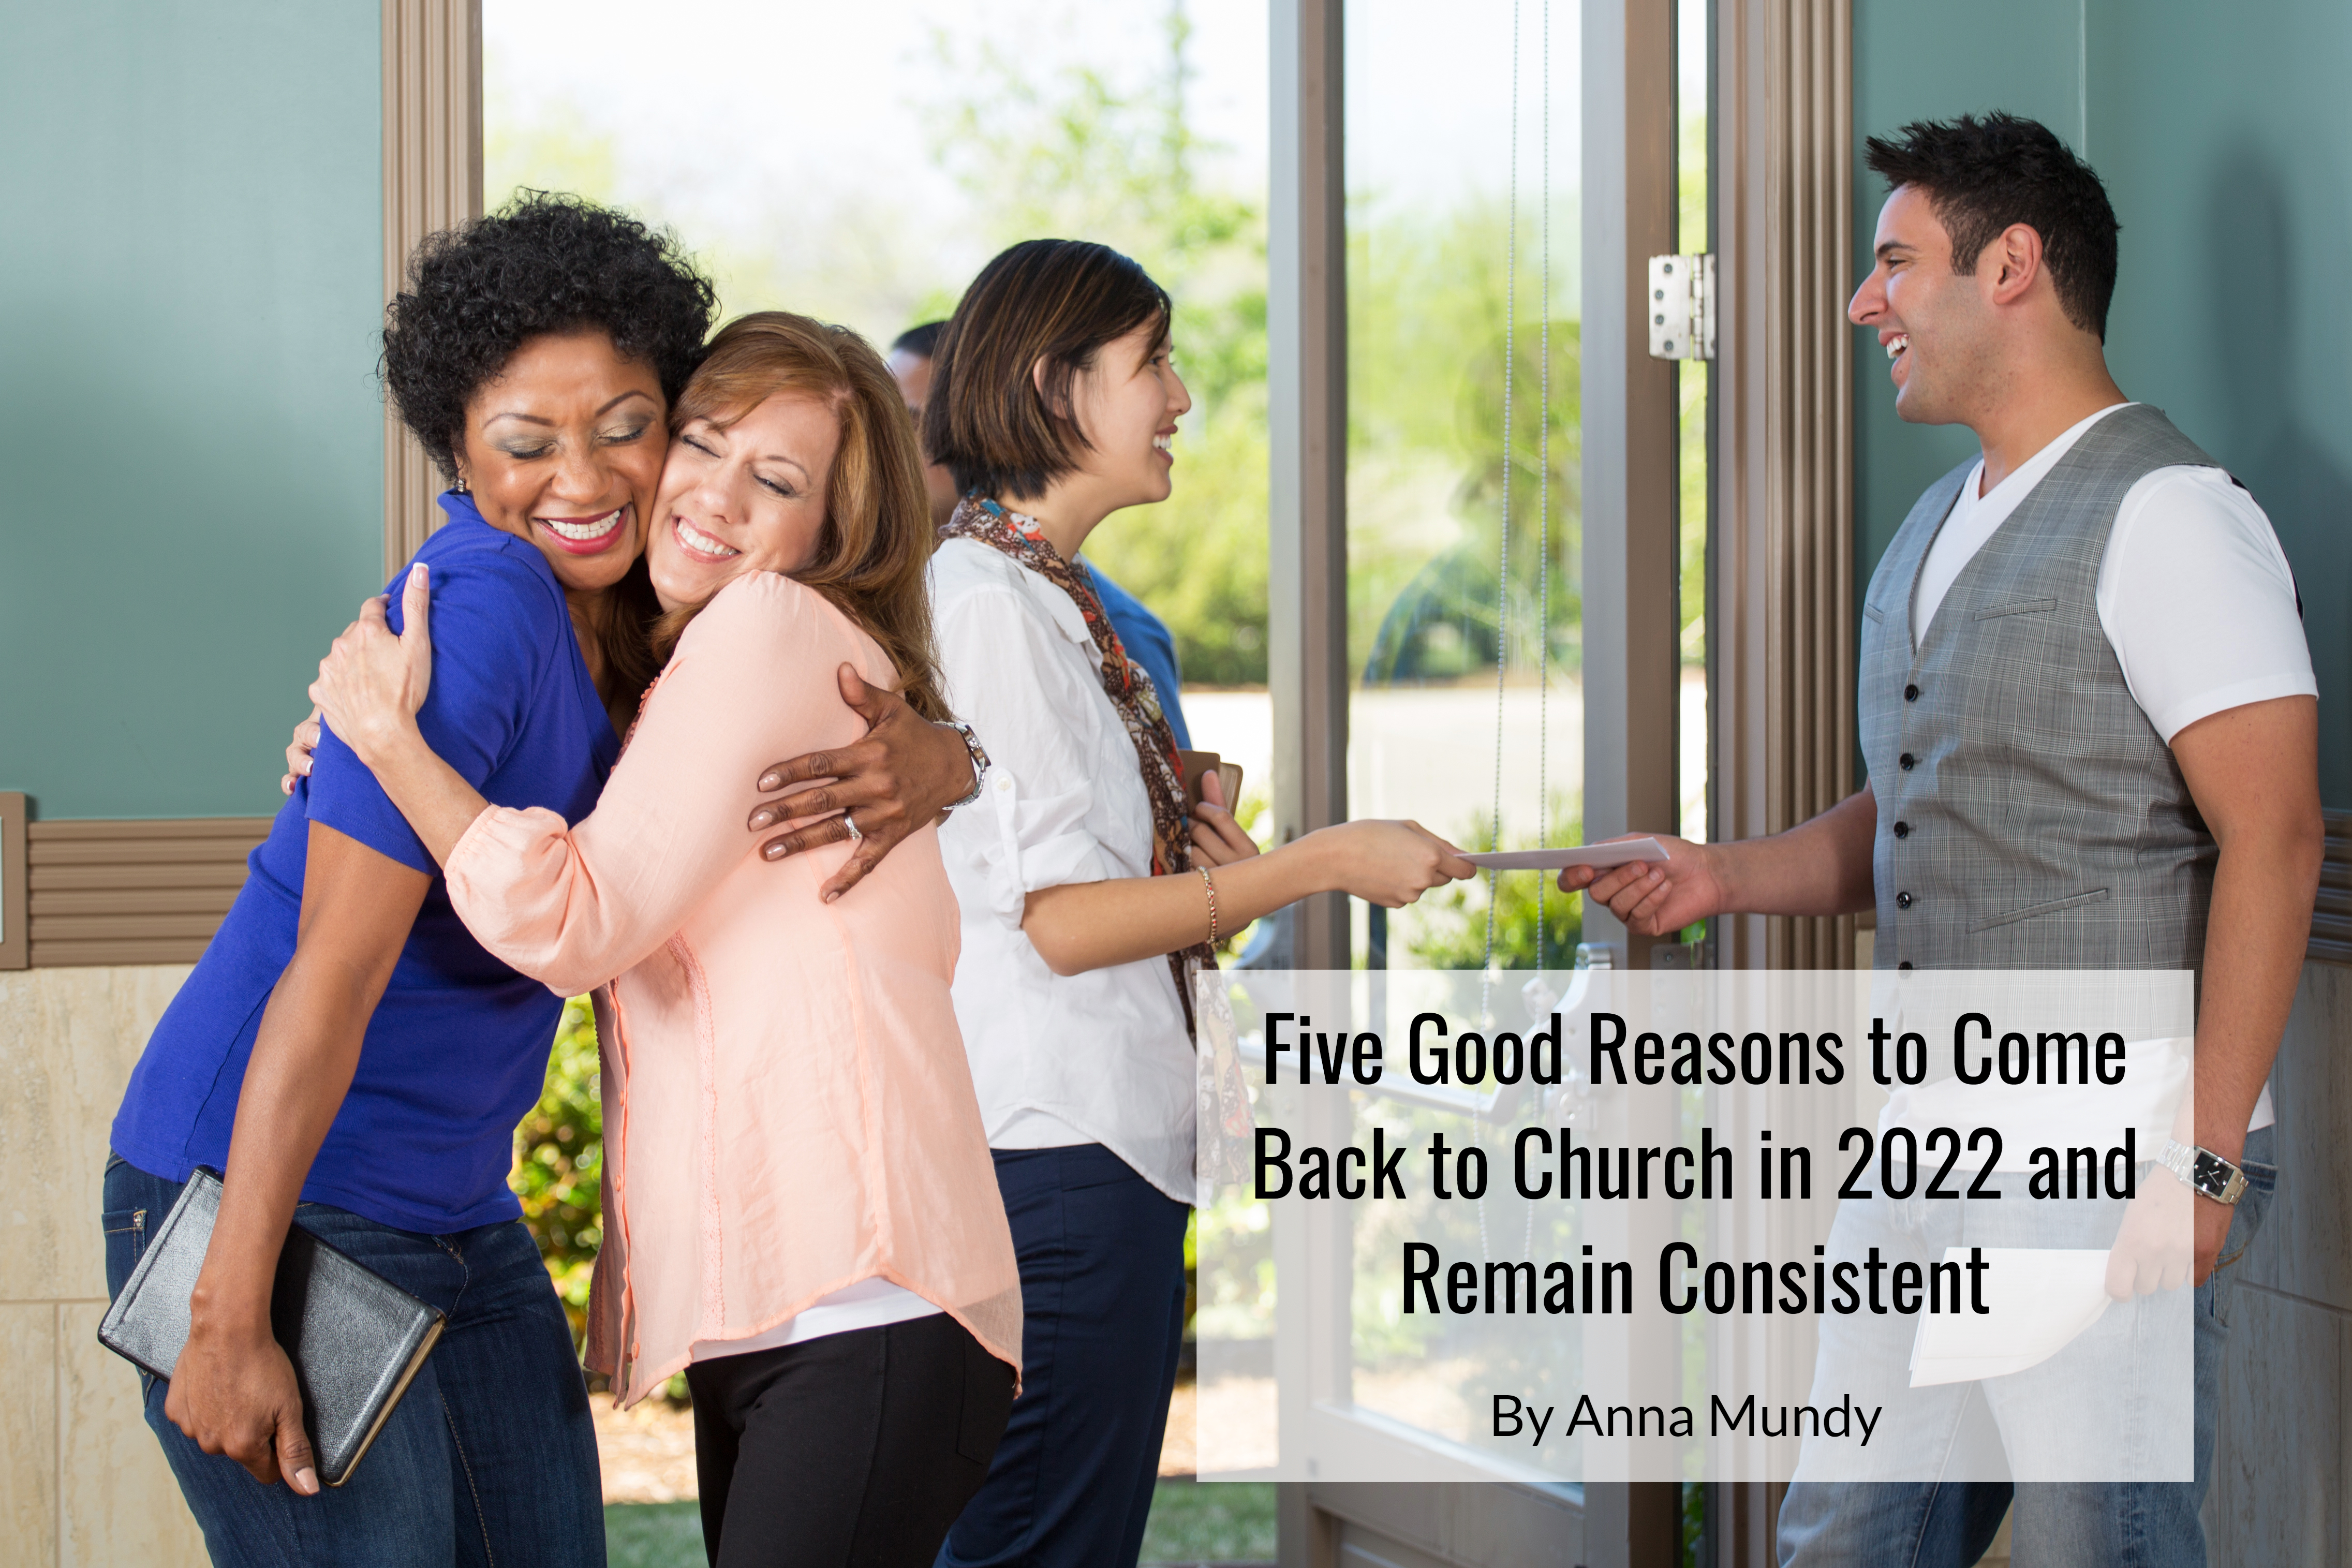 Five Good Reasons to Come Back to Church in 2022 and Remain Consistent